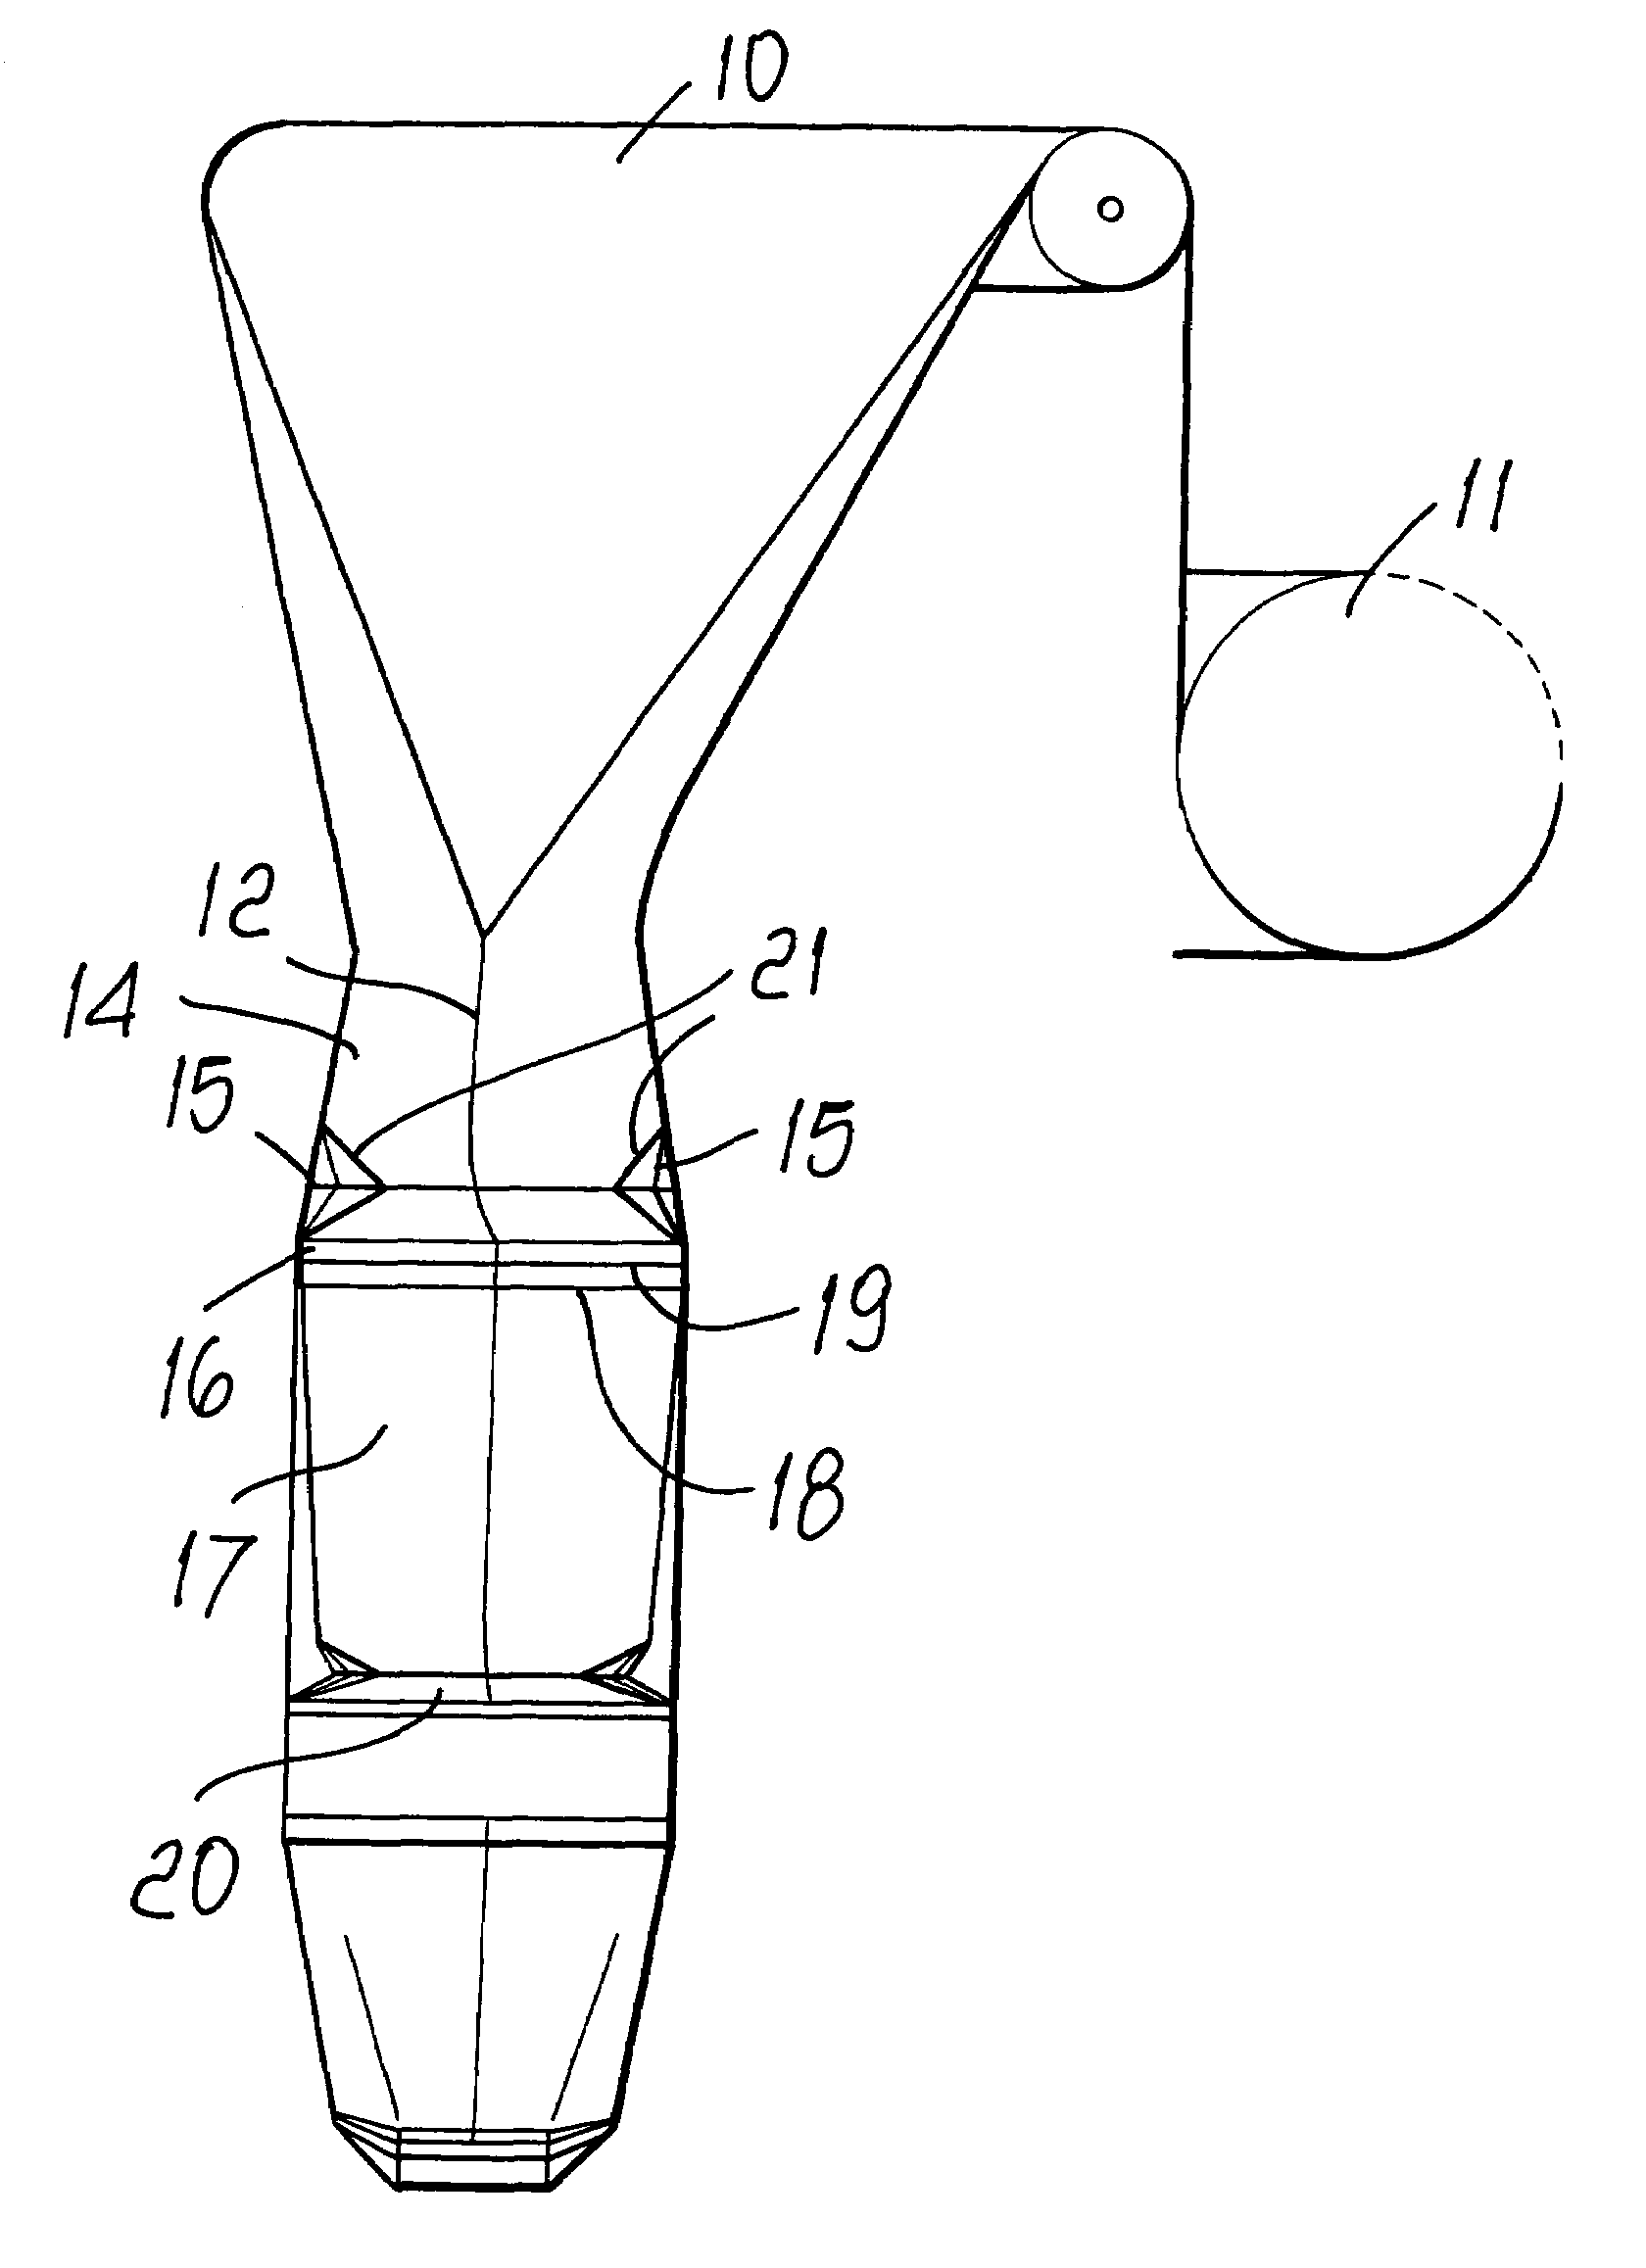 Method for manufacturing container with inherently stable base